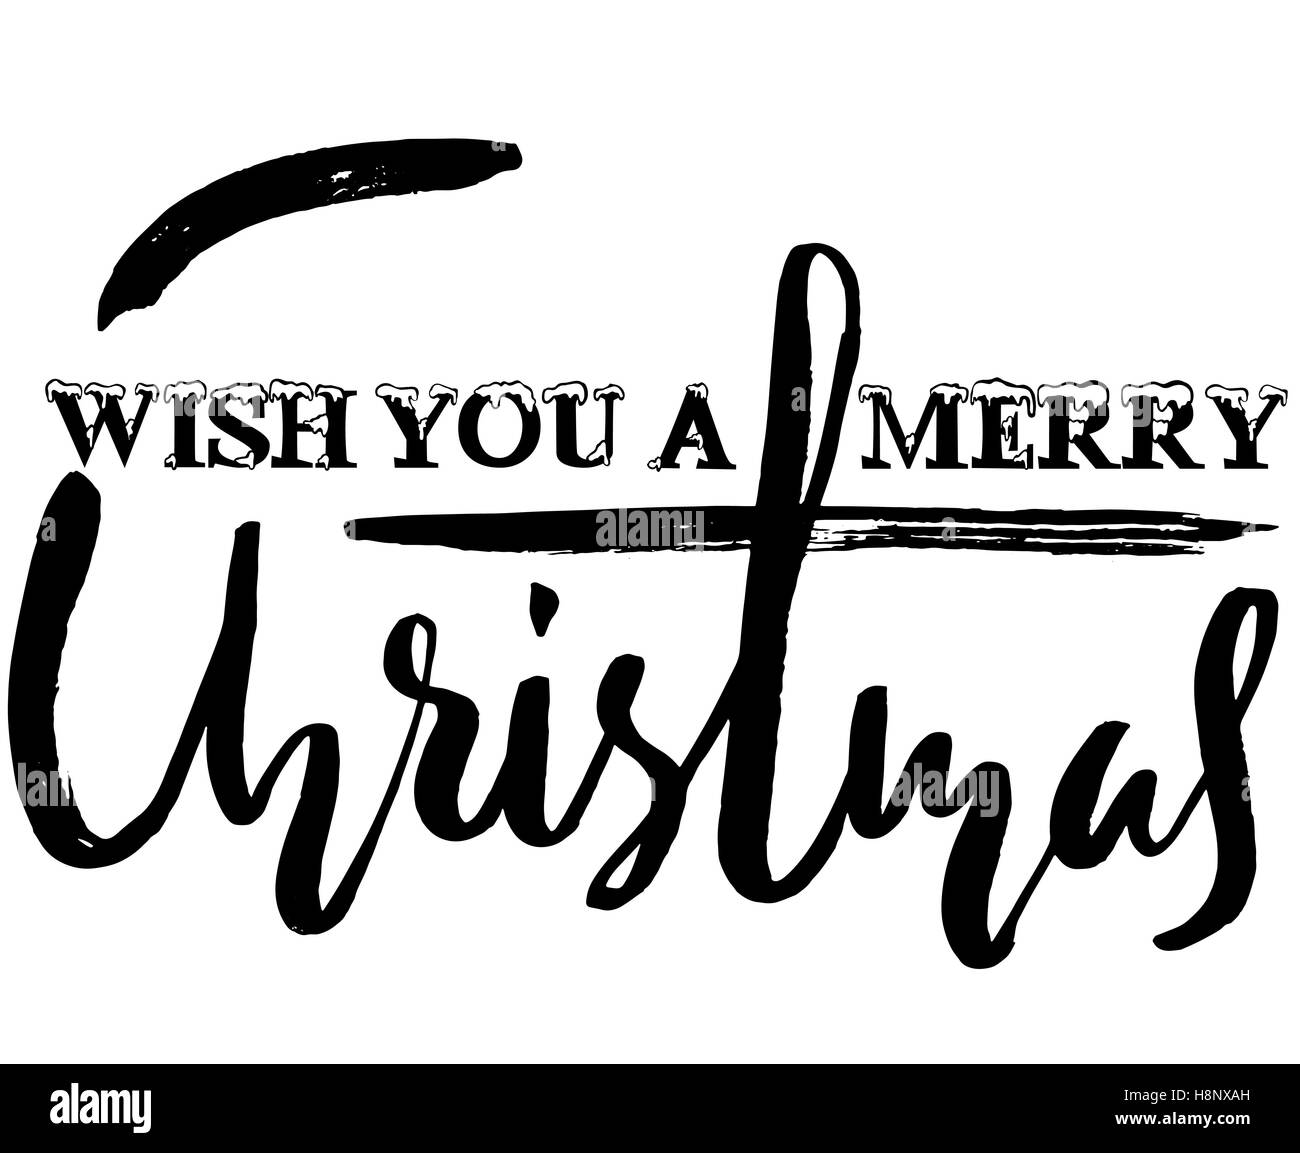 Classic lettering design for a Christmas greetings card. Black and white vector illustration Stock Vector